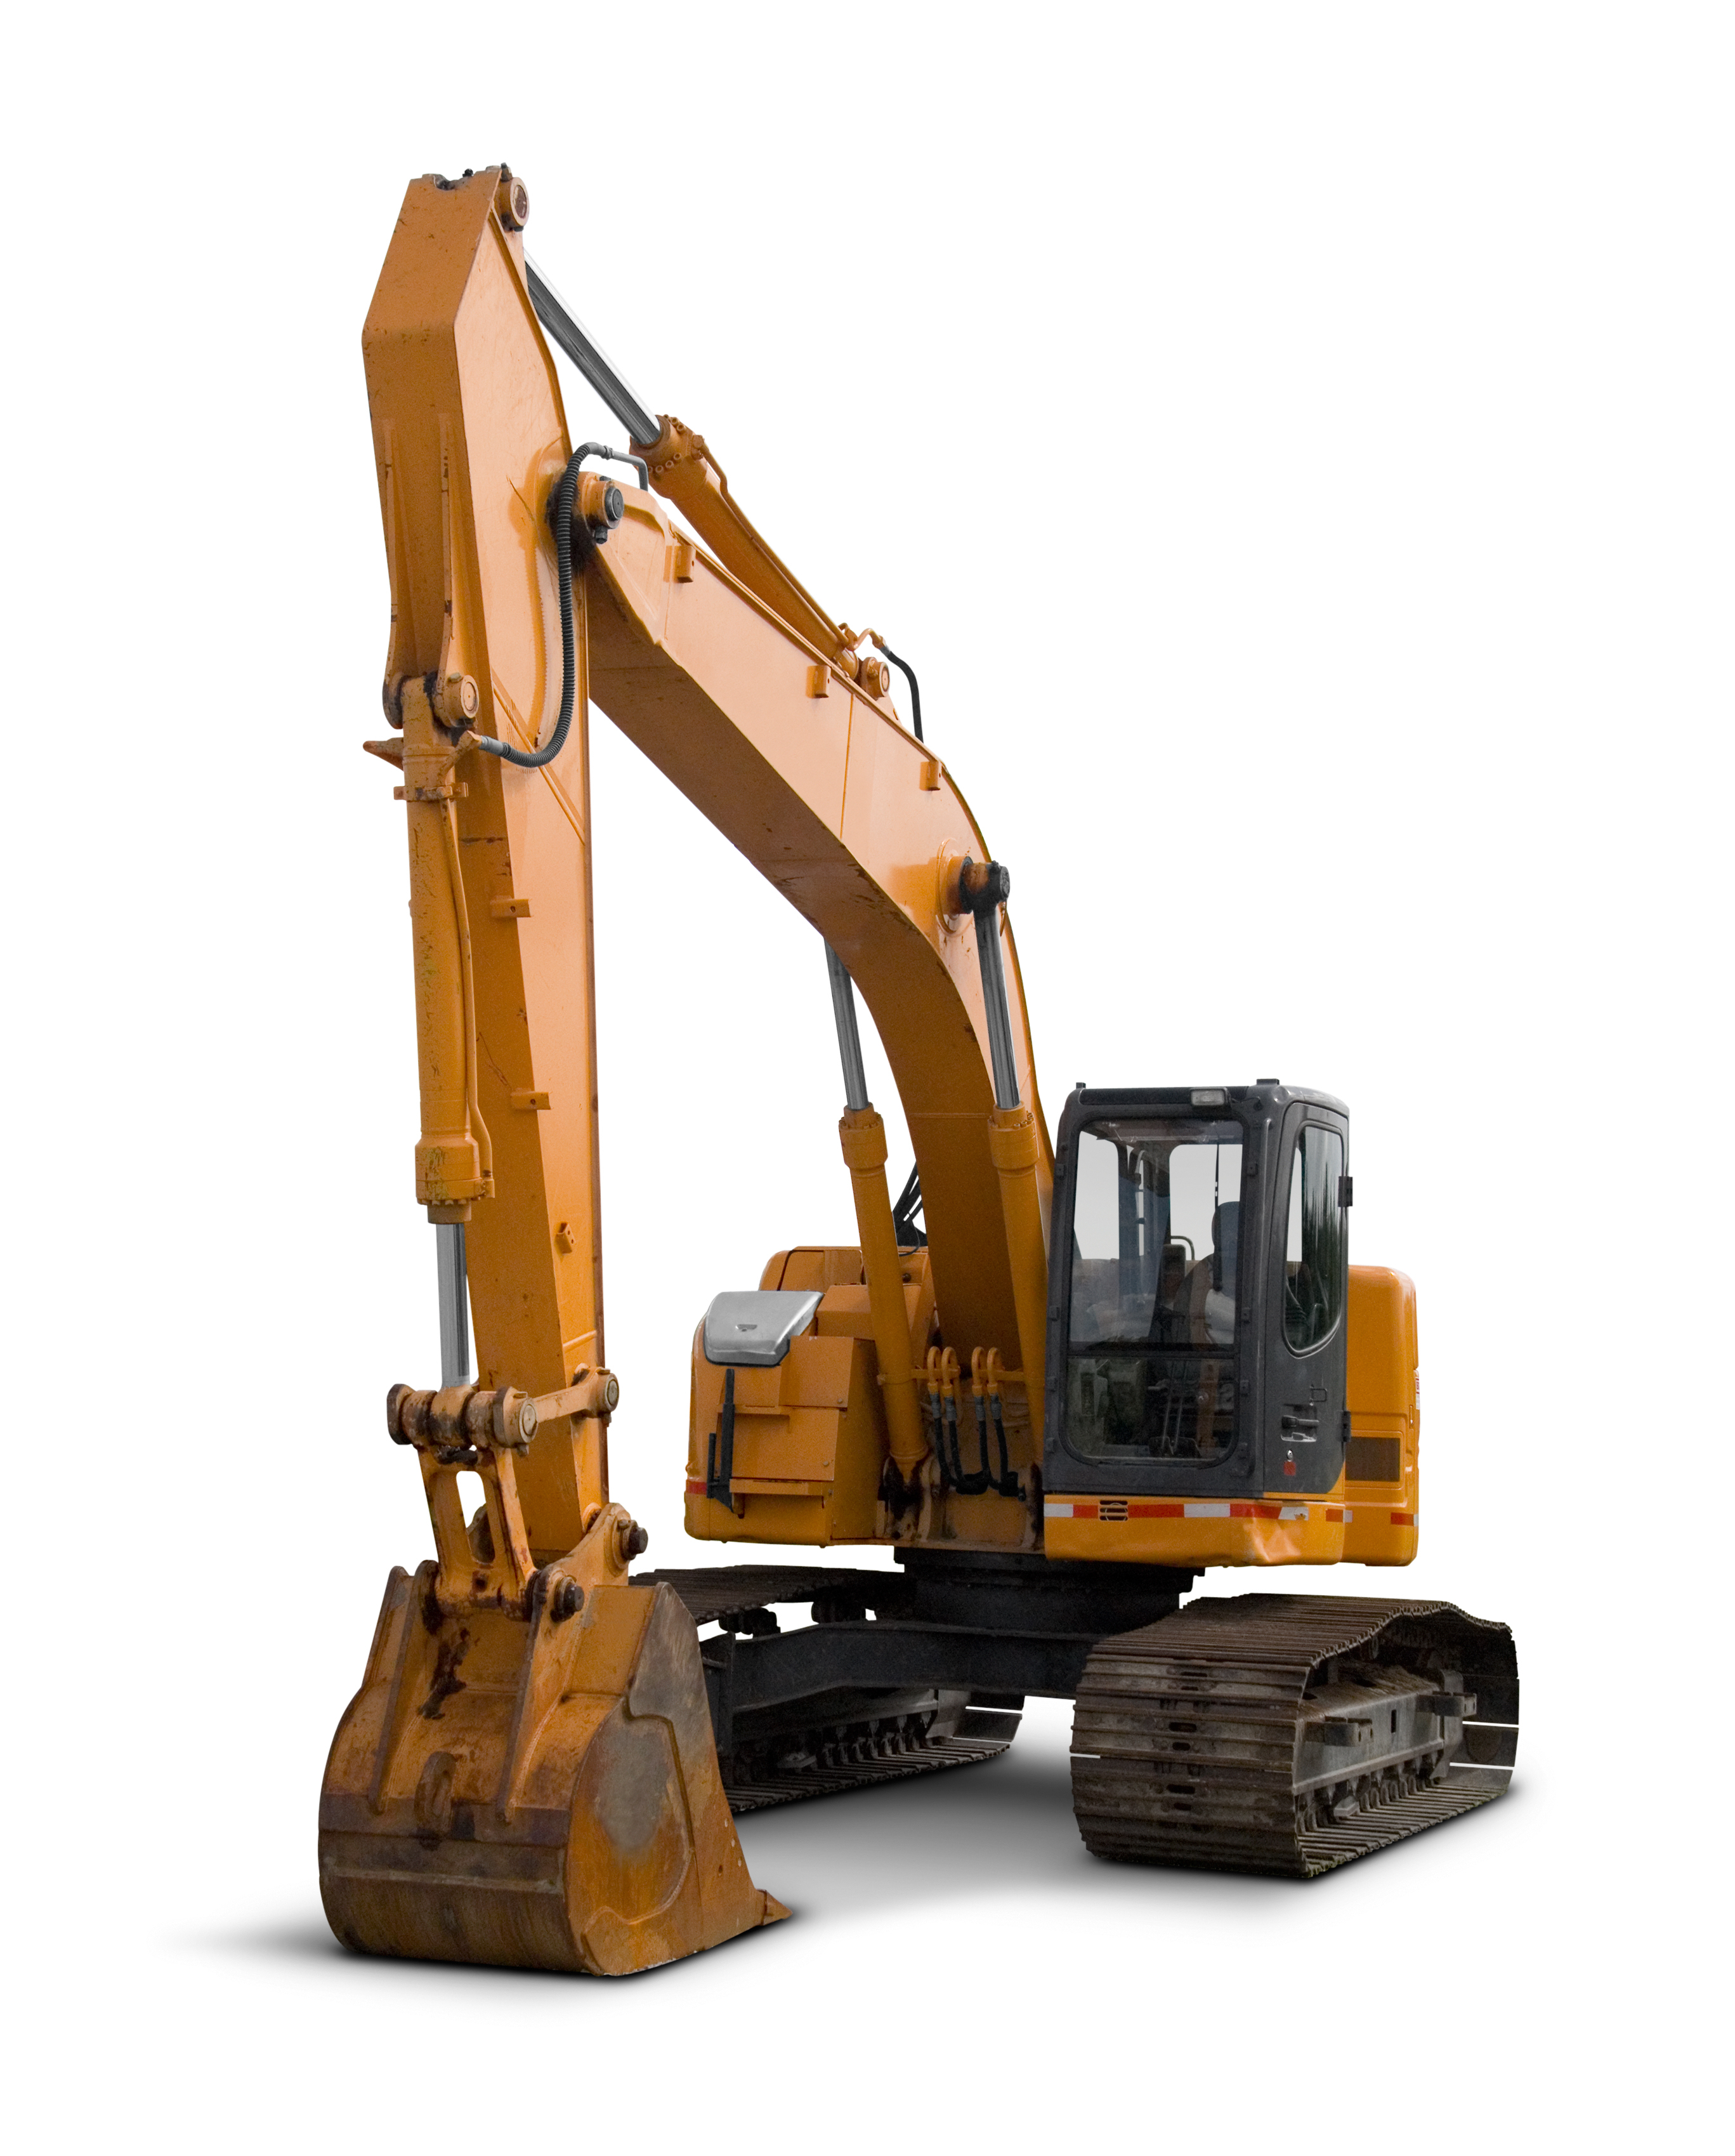 The image is of a large yellow power shovel used in construction. It is a type of bulldozer and falls under the category of construction equipment. The additional context mentions MBK Constructors in Ann Arbor, MI, specializing in home improvements.